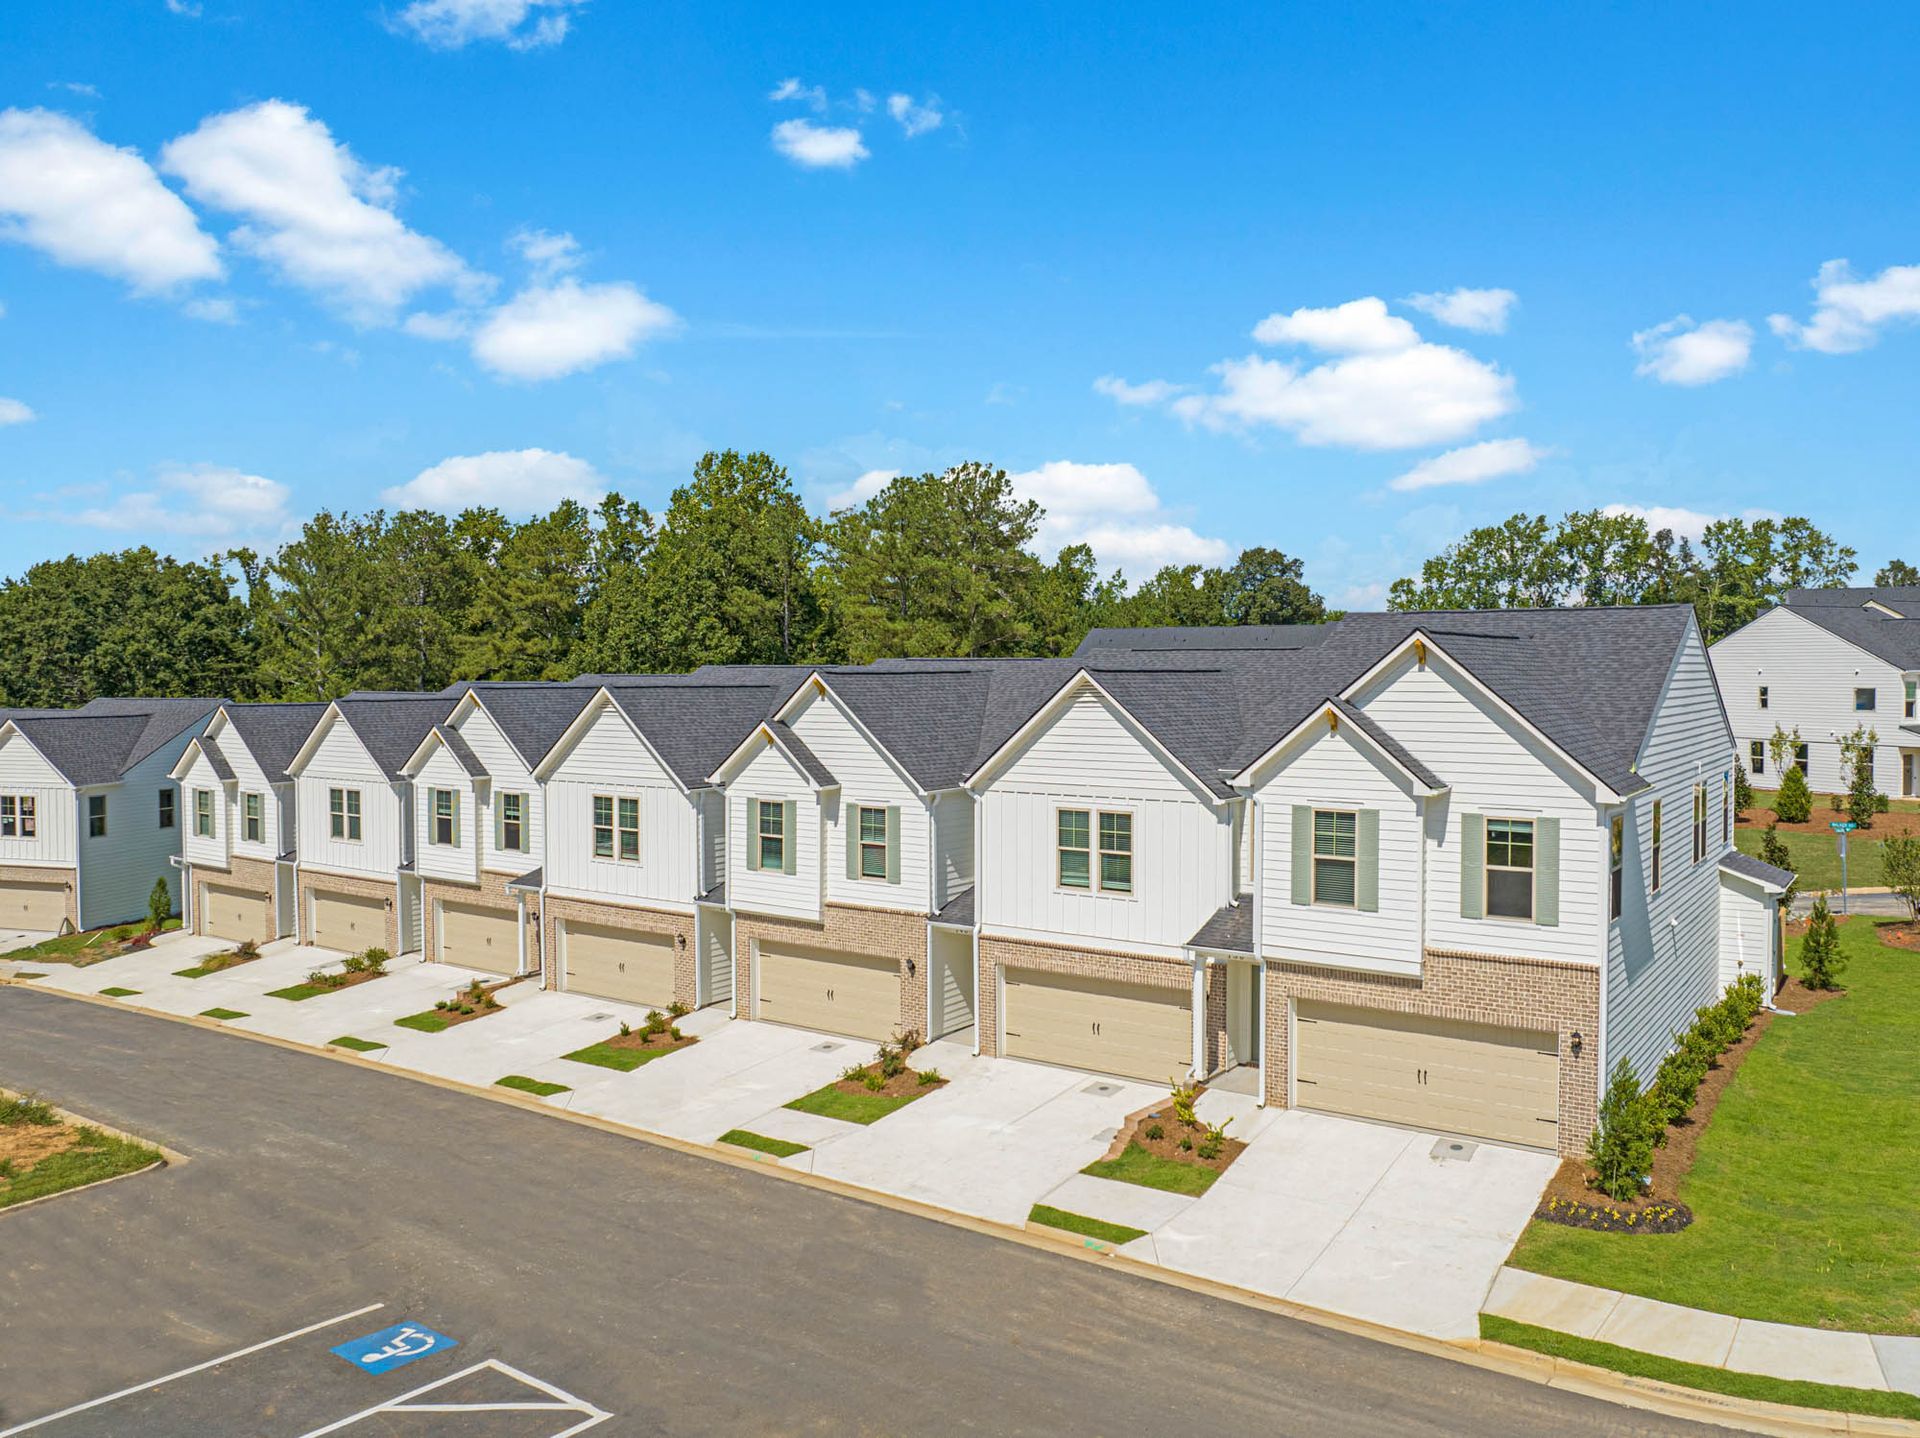 An aerial view of a row of houses with garages in a residential area at Mayridge Canton FKA Summerwalk Townhomes